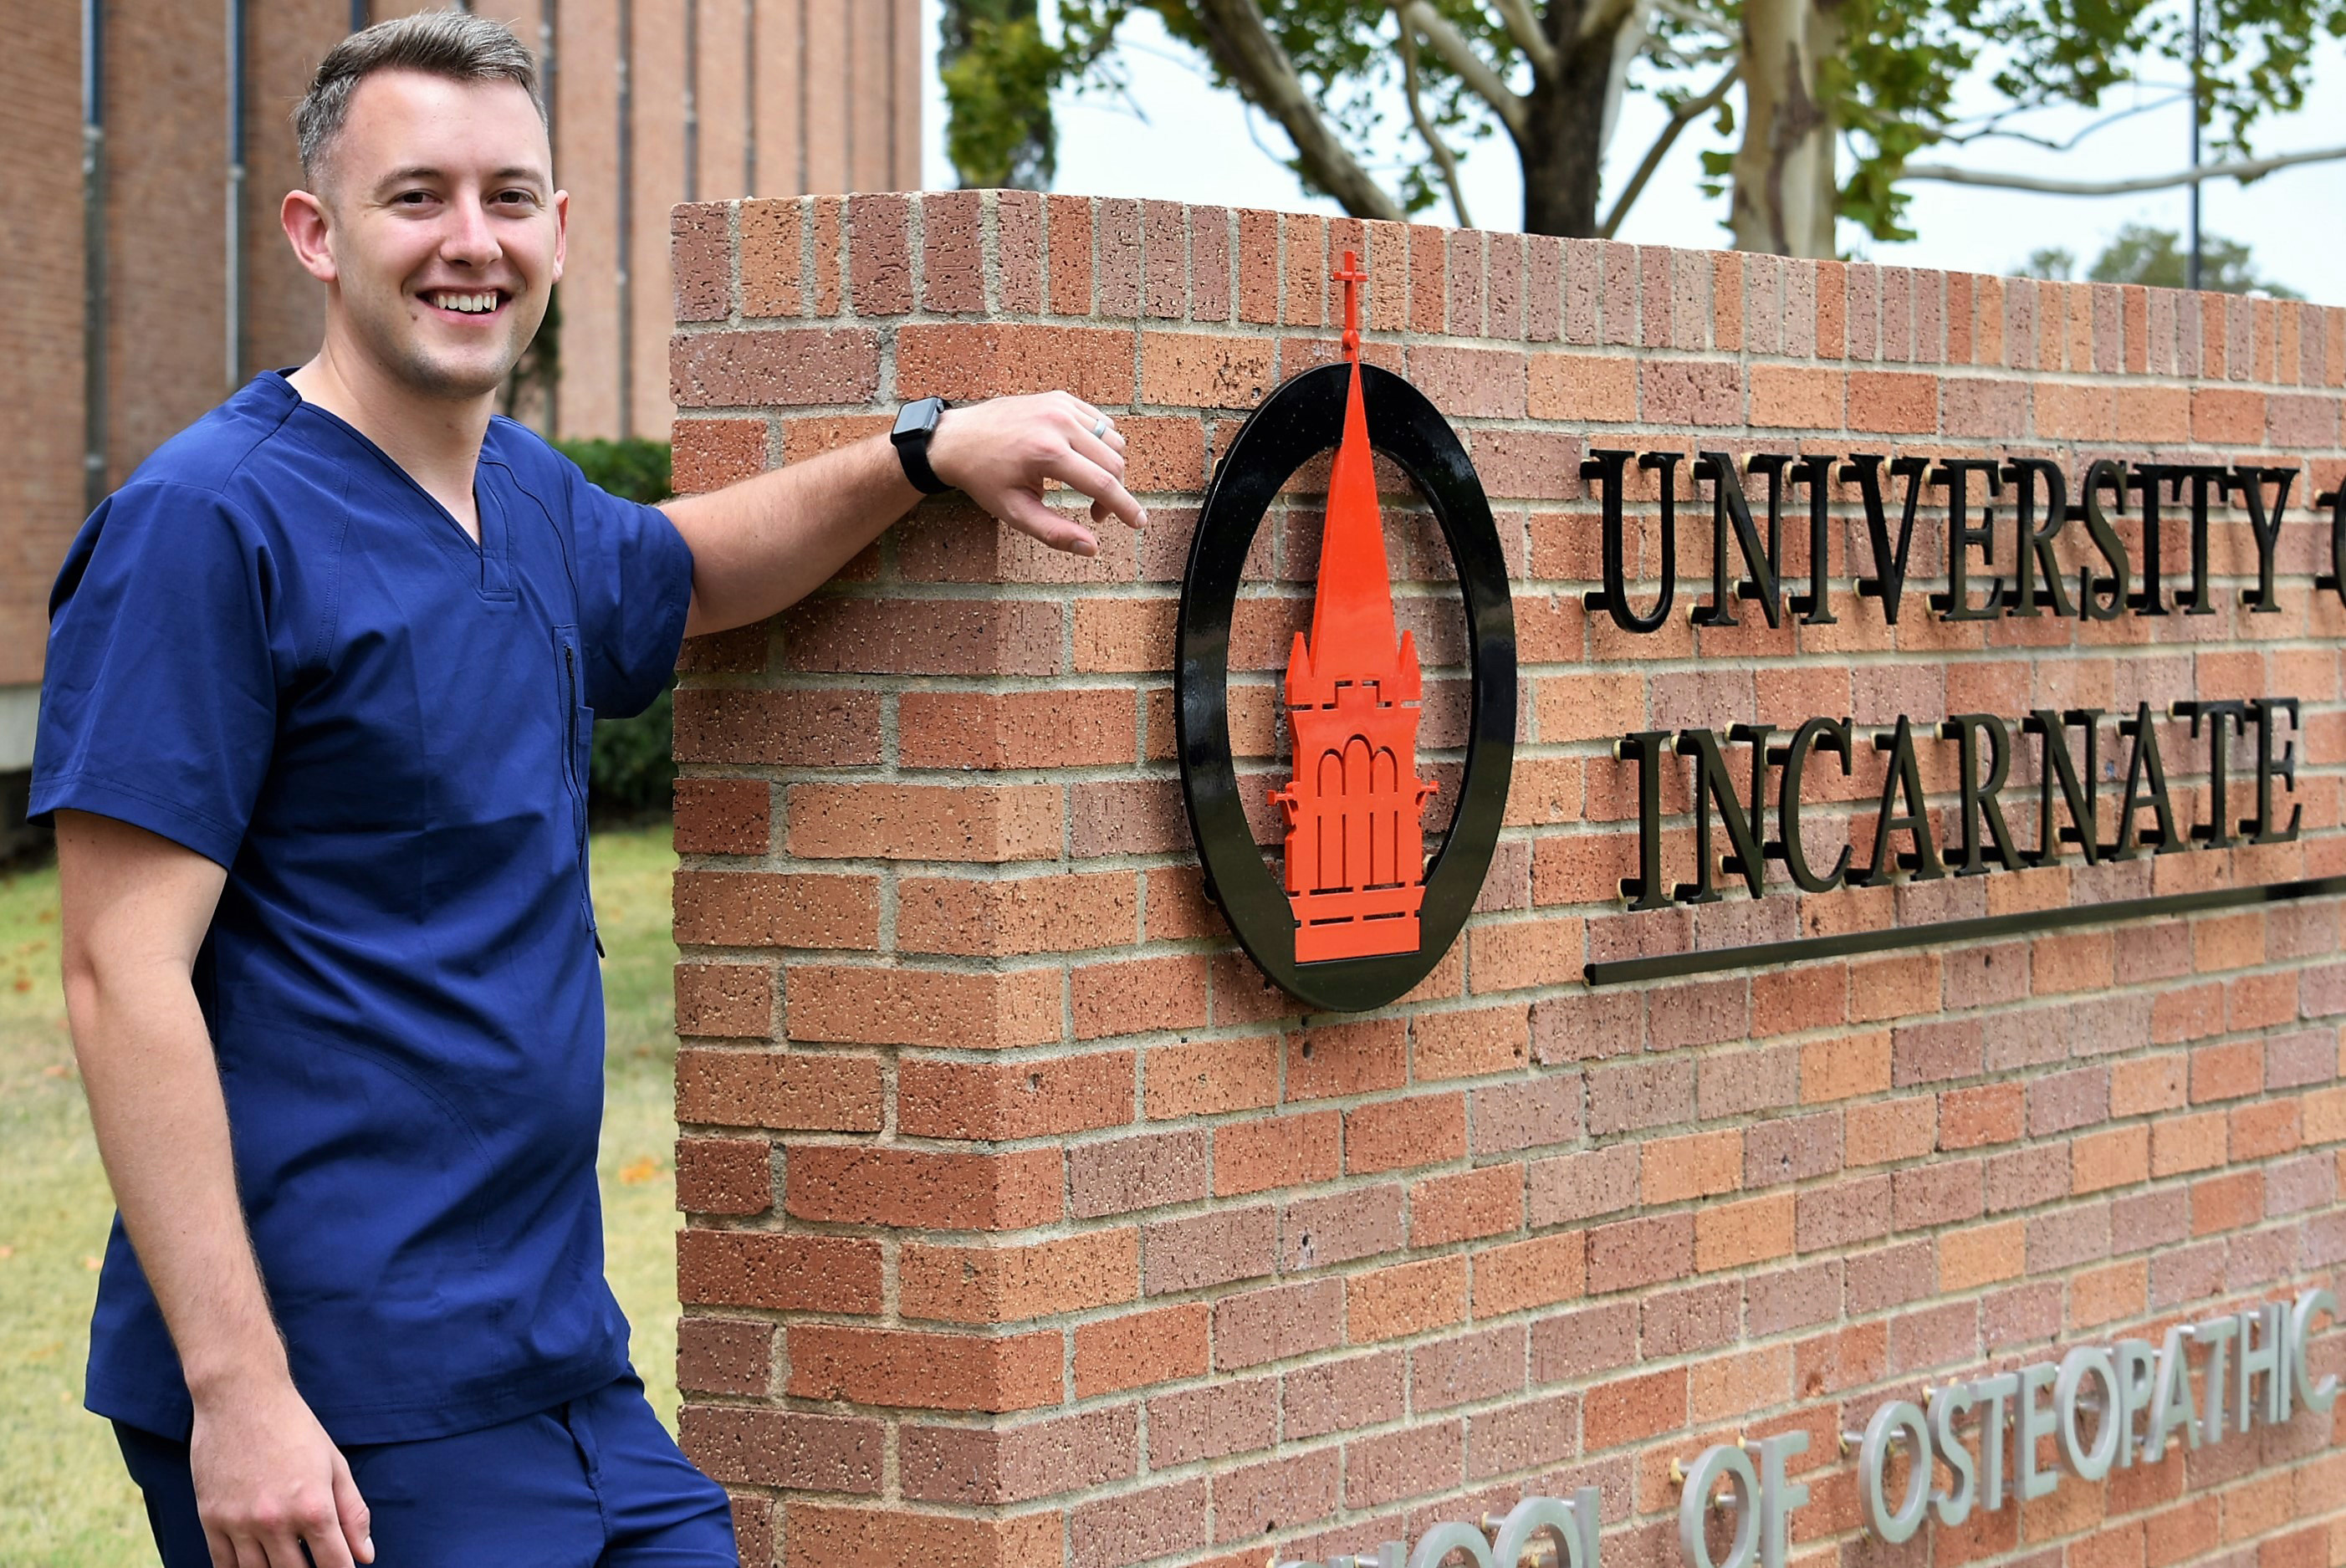 University Of The Incarnate Word School Of Osteopathic Medicine Master Of  Biomedical Sciences - CollegeLearners.com